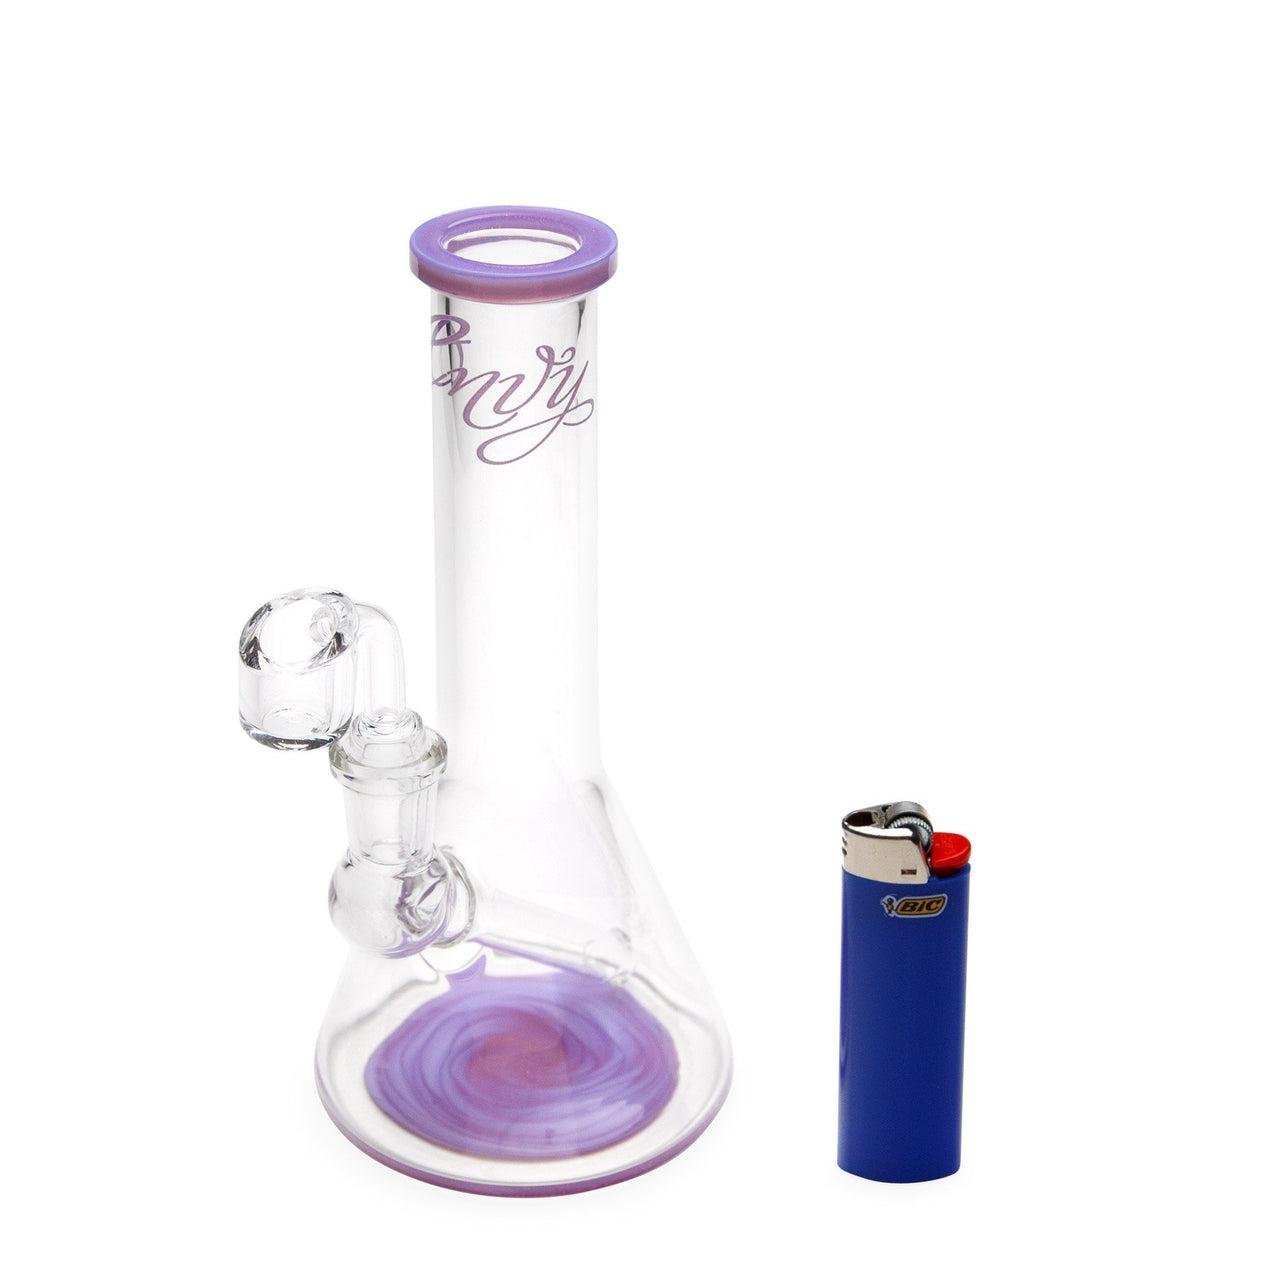 Envy Glass Banger Hanger - Purple - 420 Science - The most trusted online smoke shop.